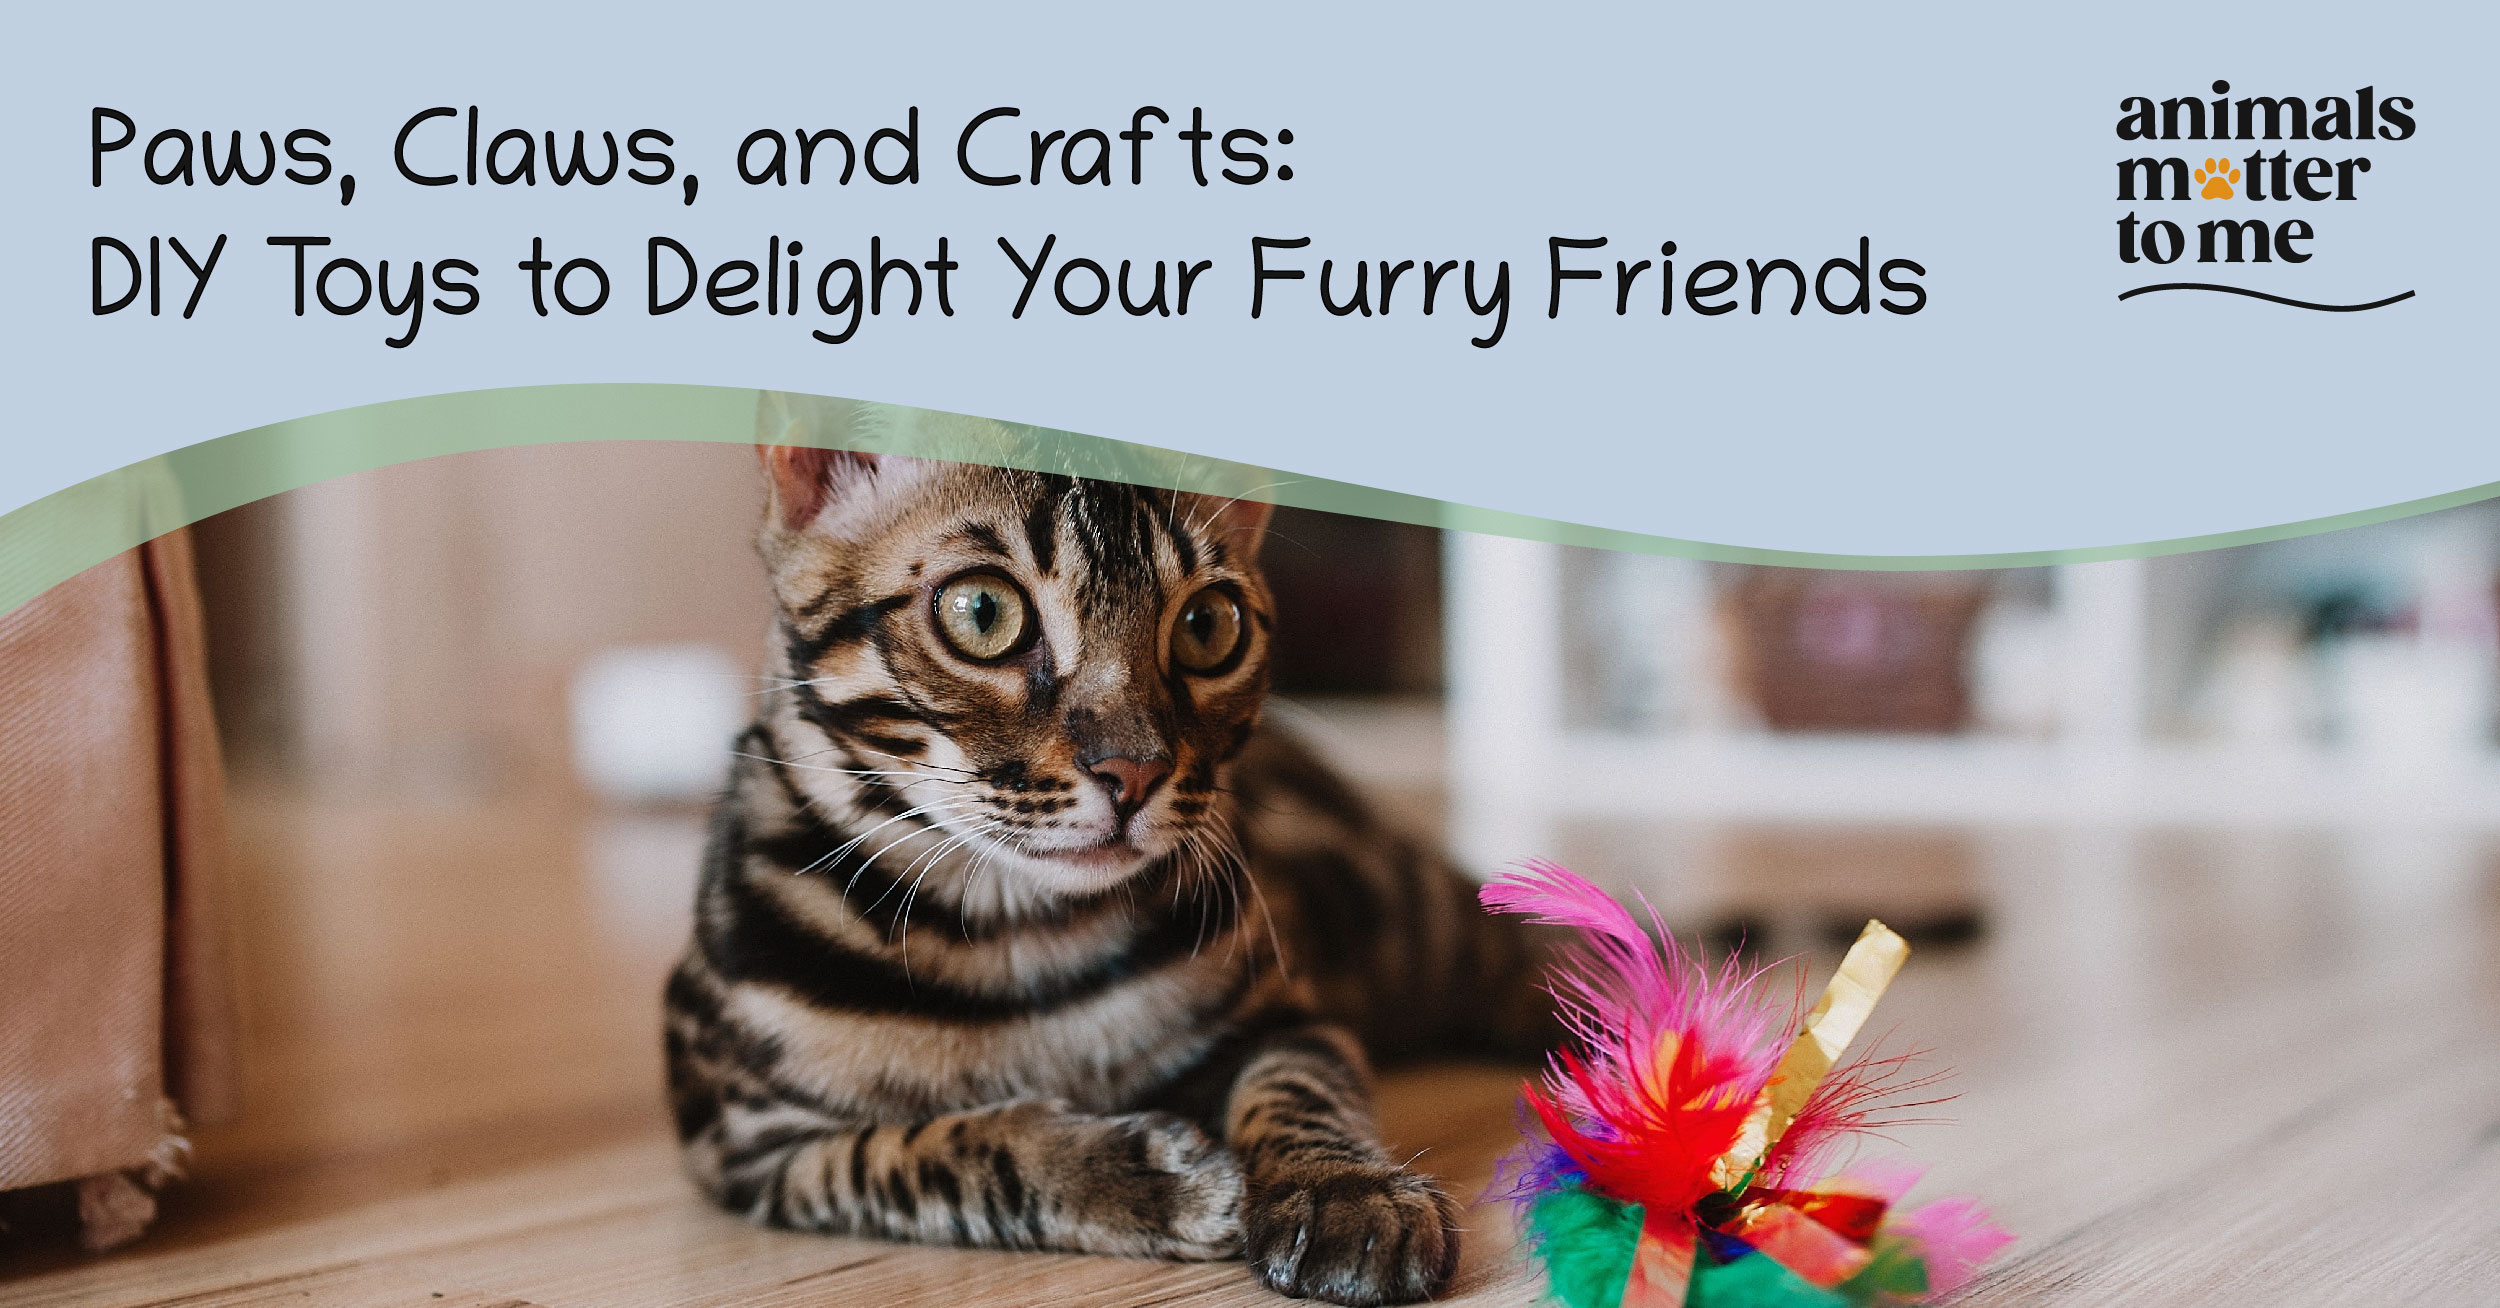 Paws, Claws, and Crafts: DIY Toys to Delight Your Furry Friends